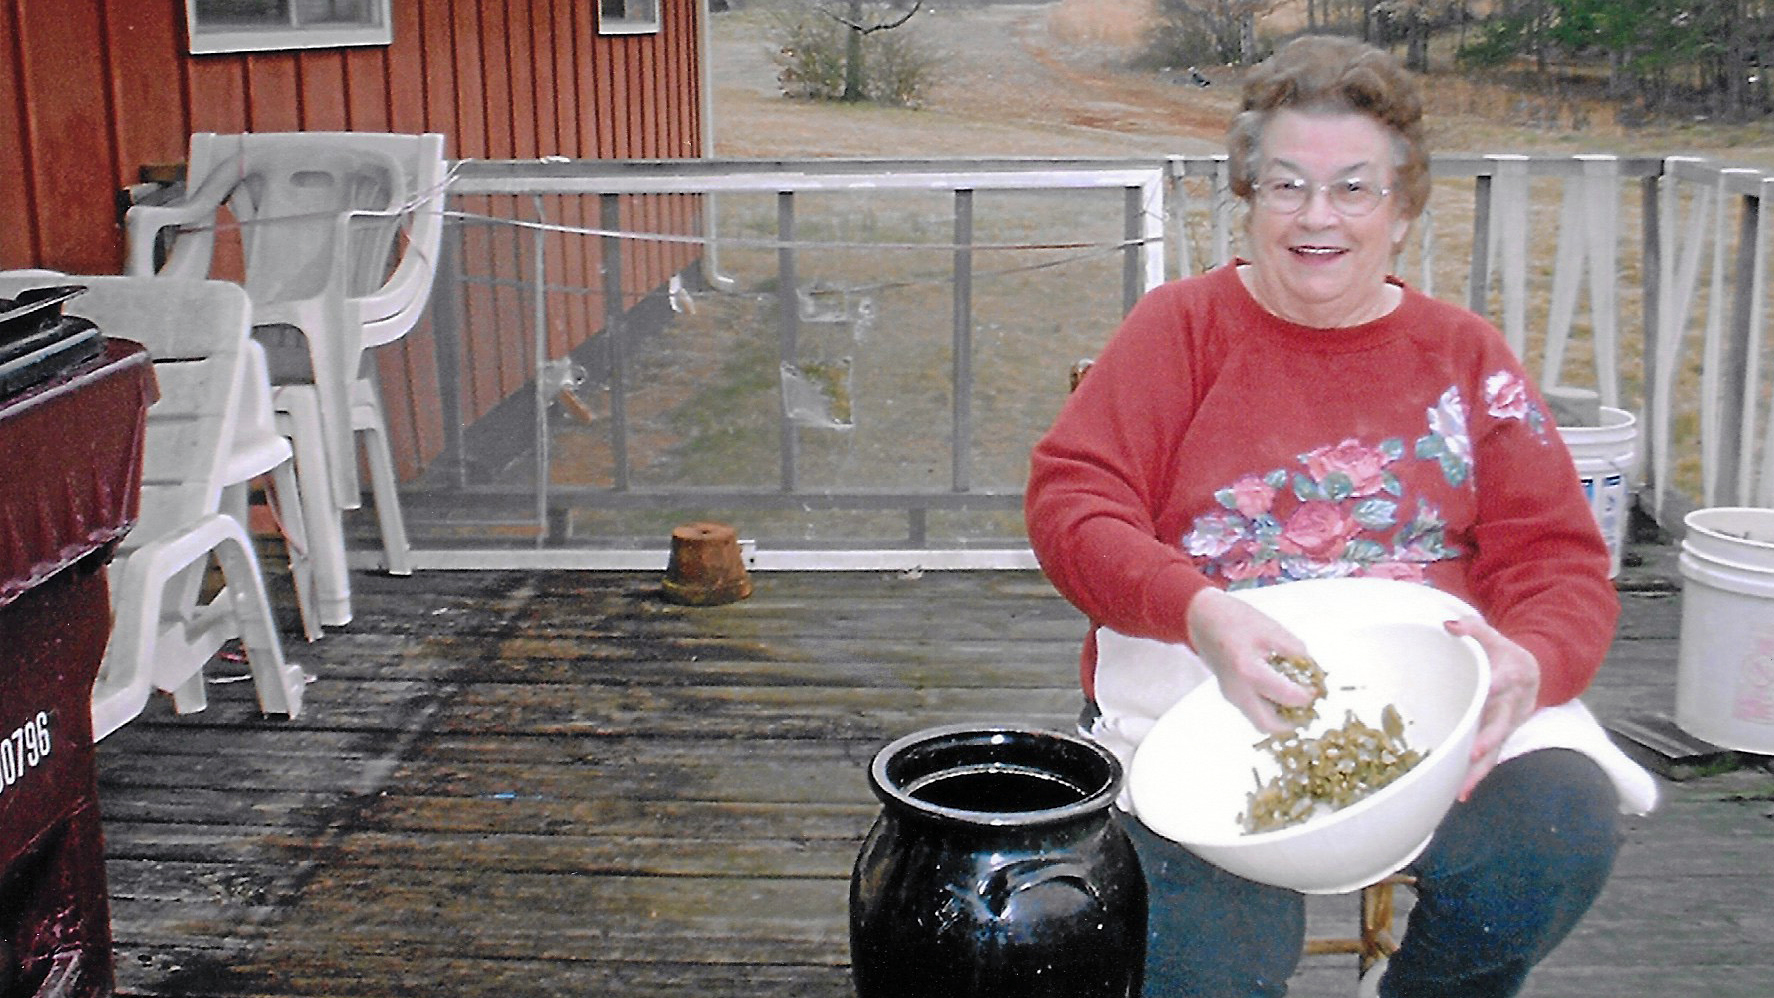 Myrtle West, the author's late grandmother, with a bowl of beans and her pickling churn